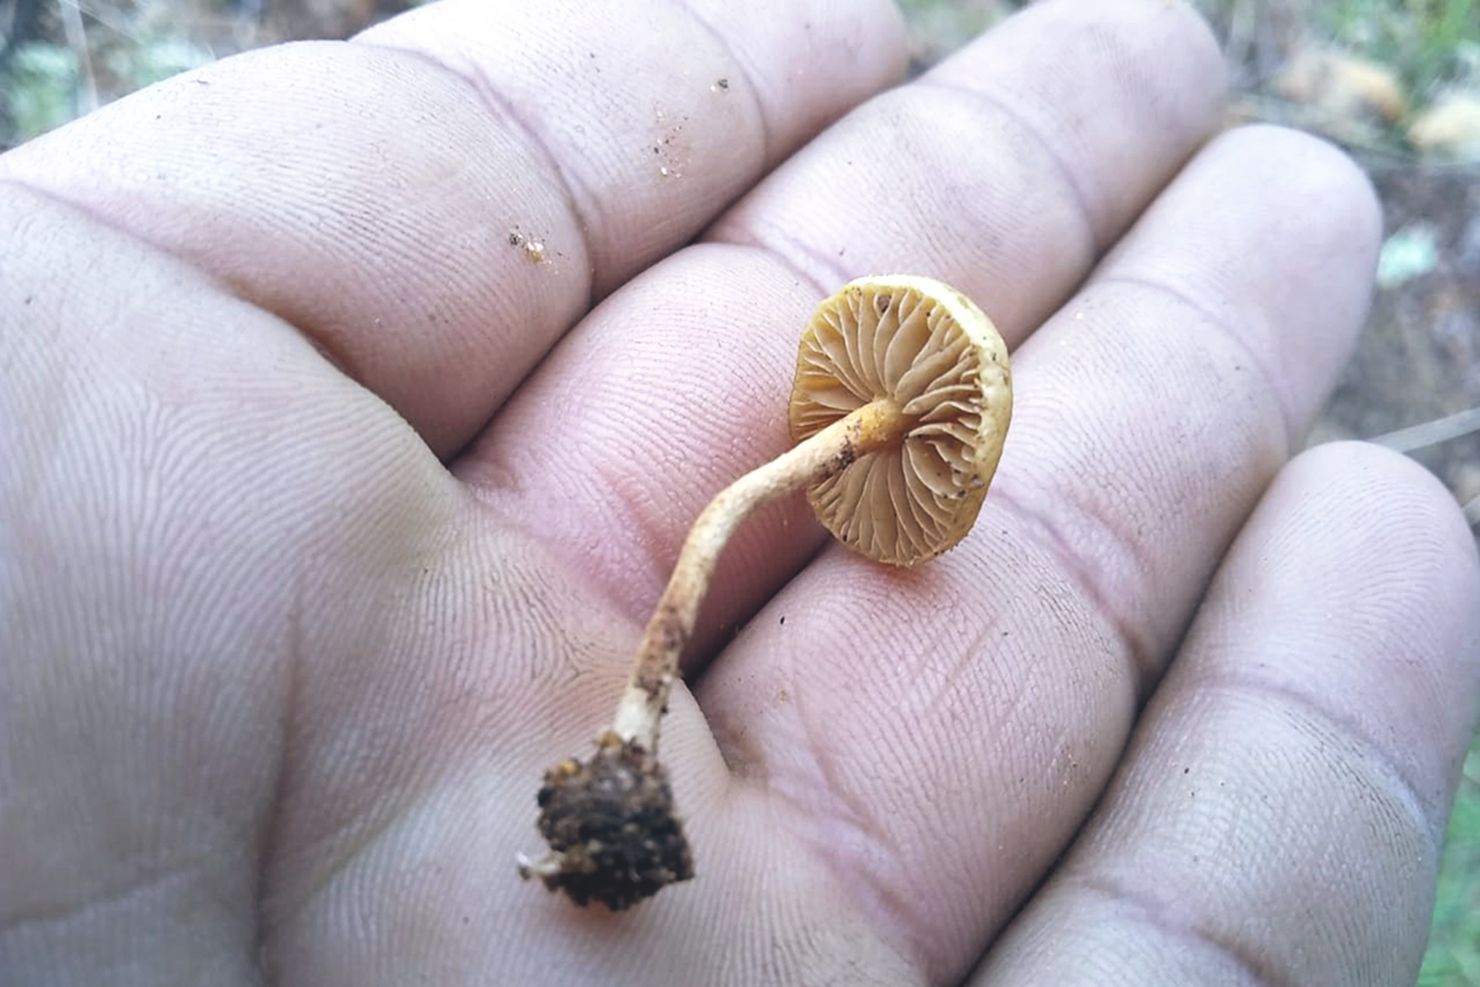 a man holds a tiny freshly picked mushroom in his hand